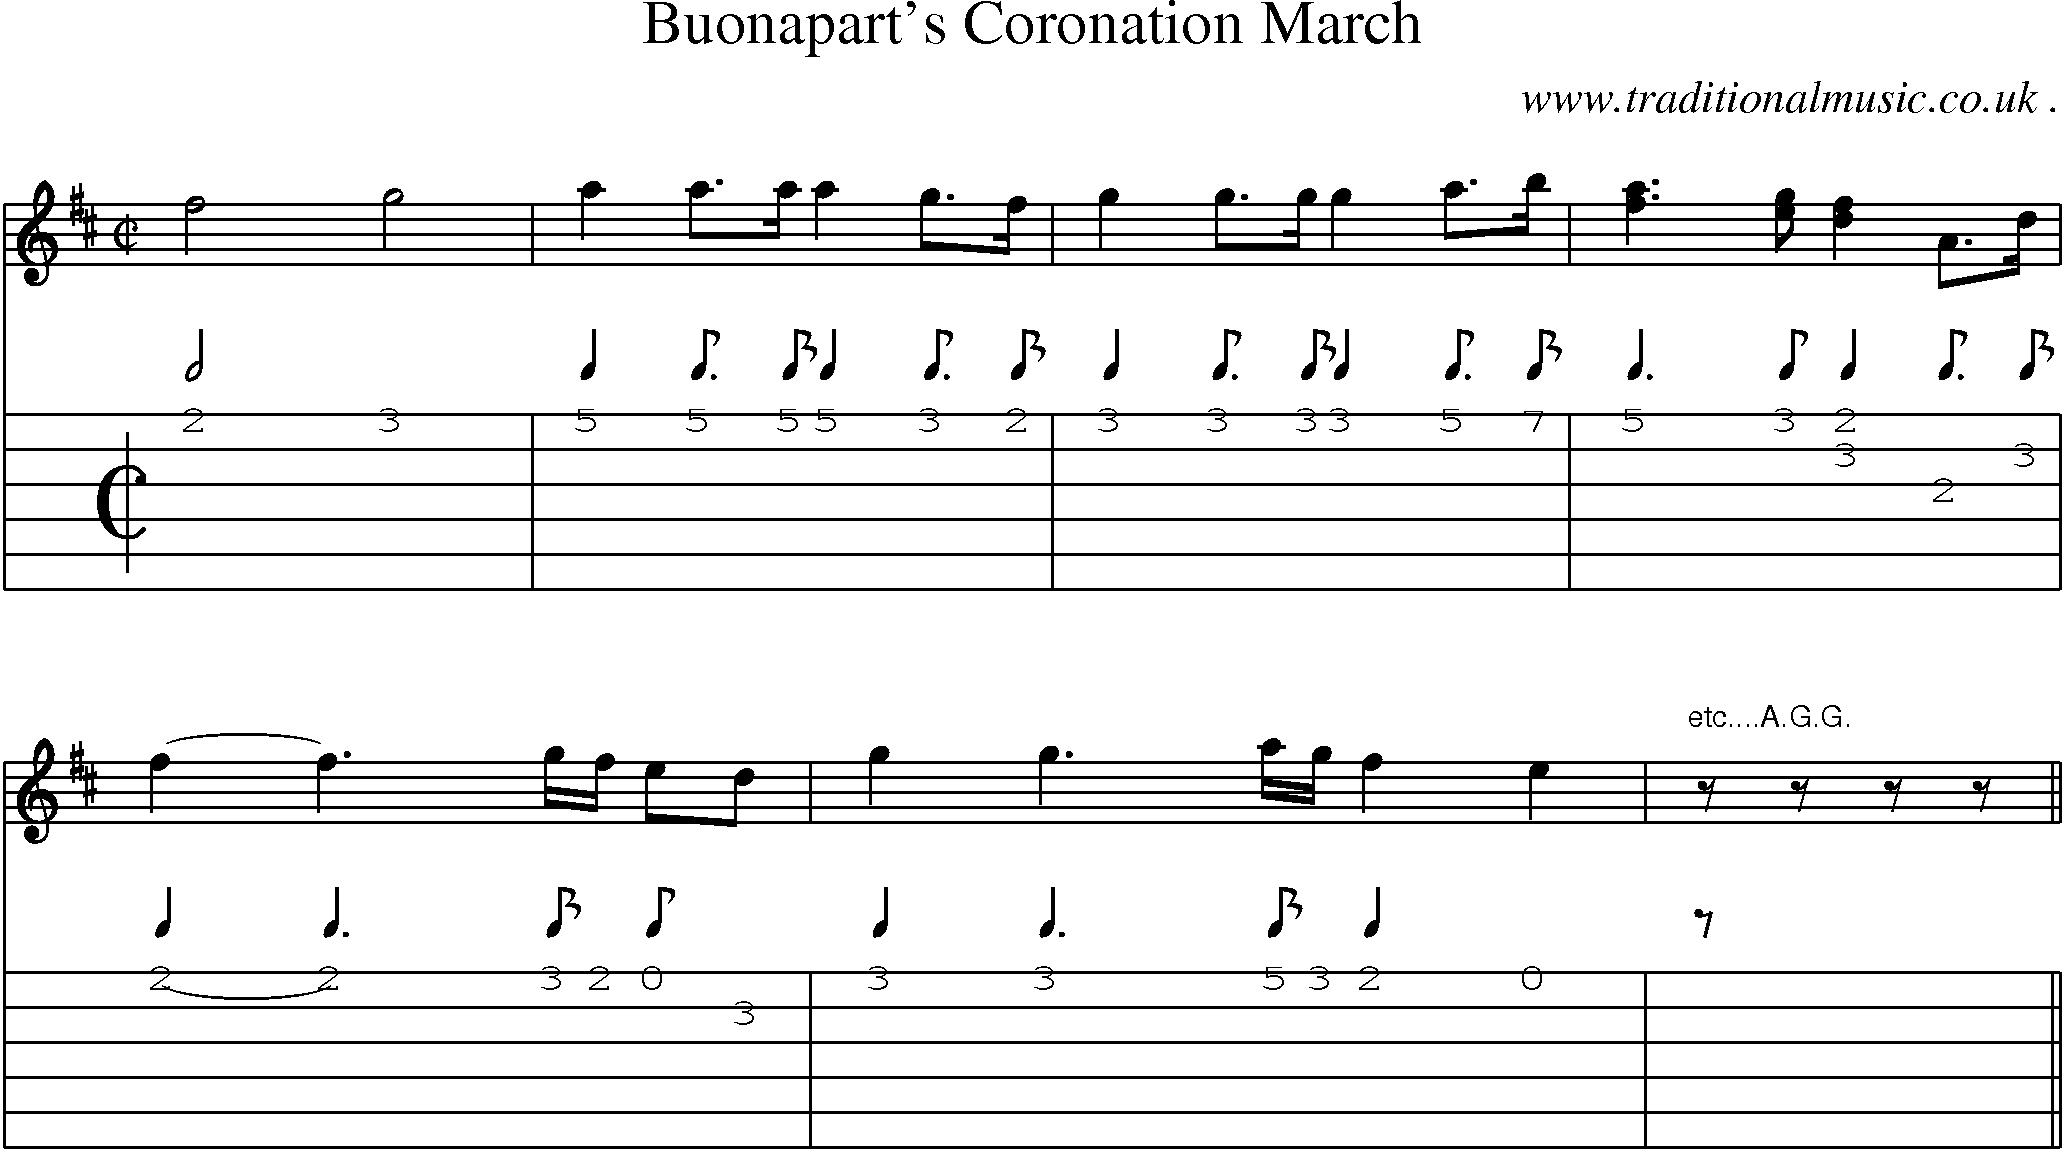 Sheet-Music and Guitar Tabs for Buonaparts Coronation March